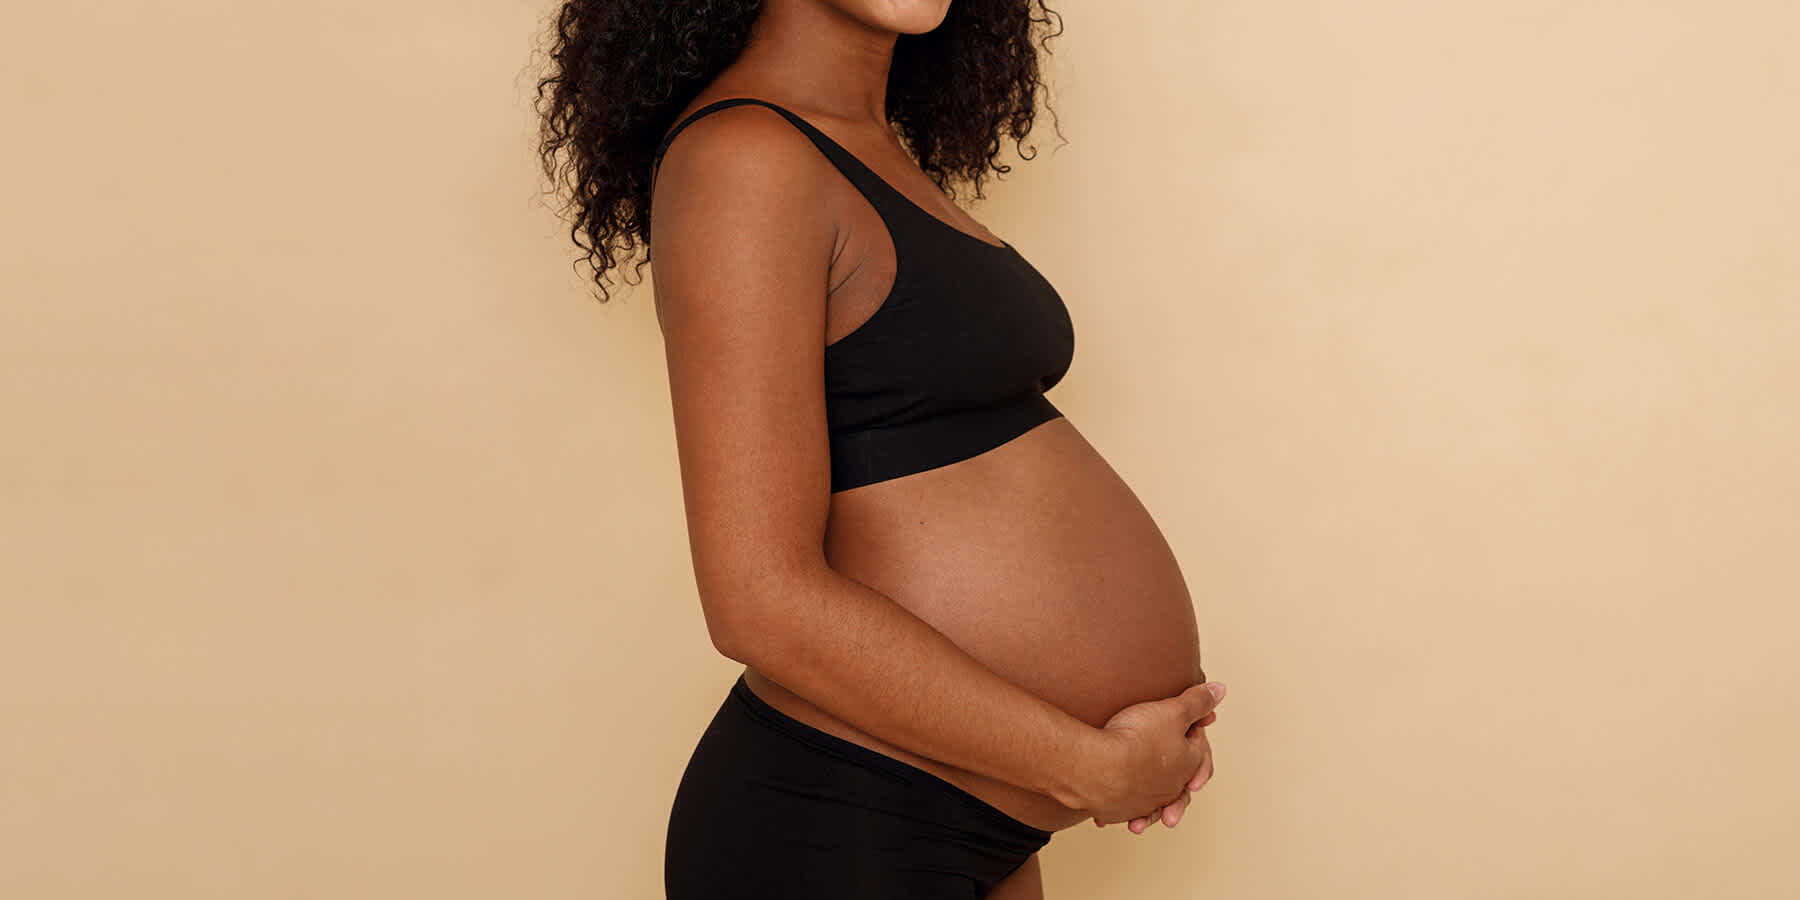 Young pregnant woman against a yellow background